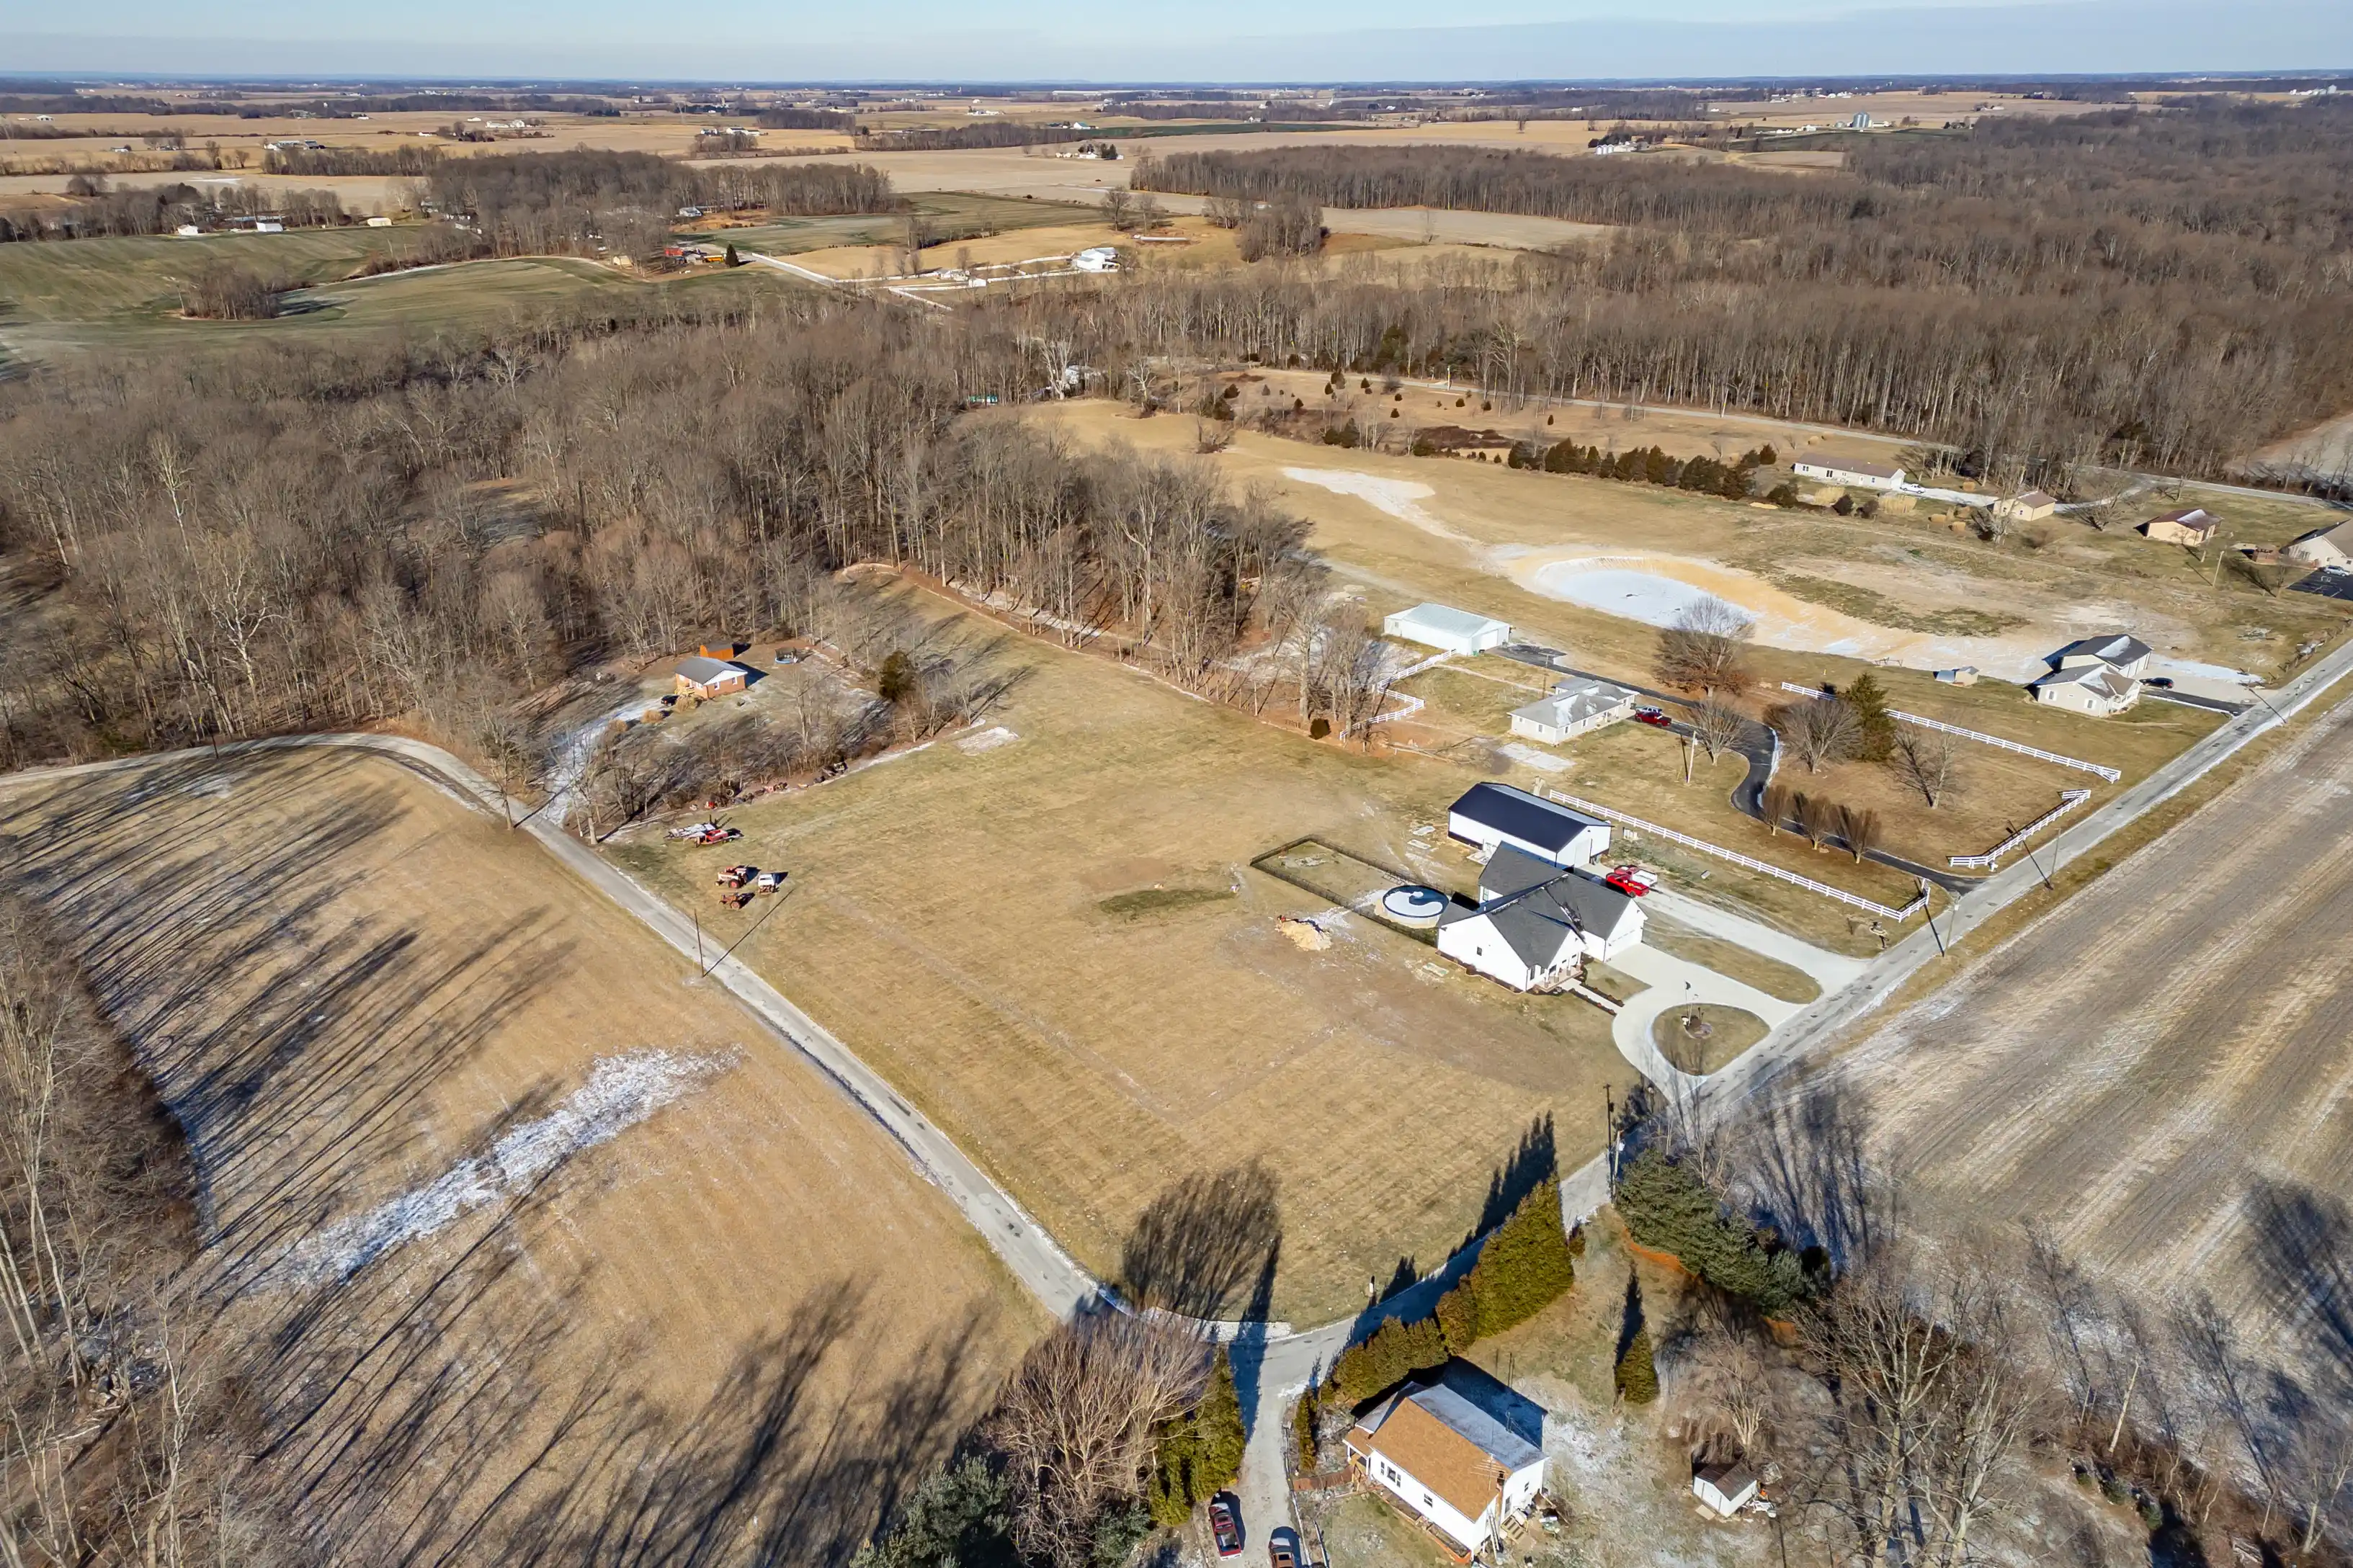 Aerial view of a rural landscape showing farmlands, houses, bare trees, and roads on a sunny day.